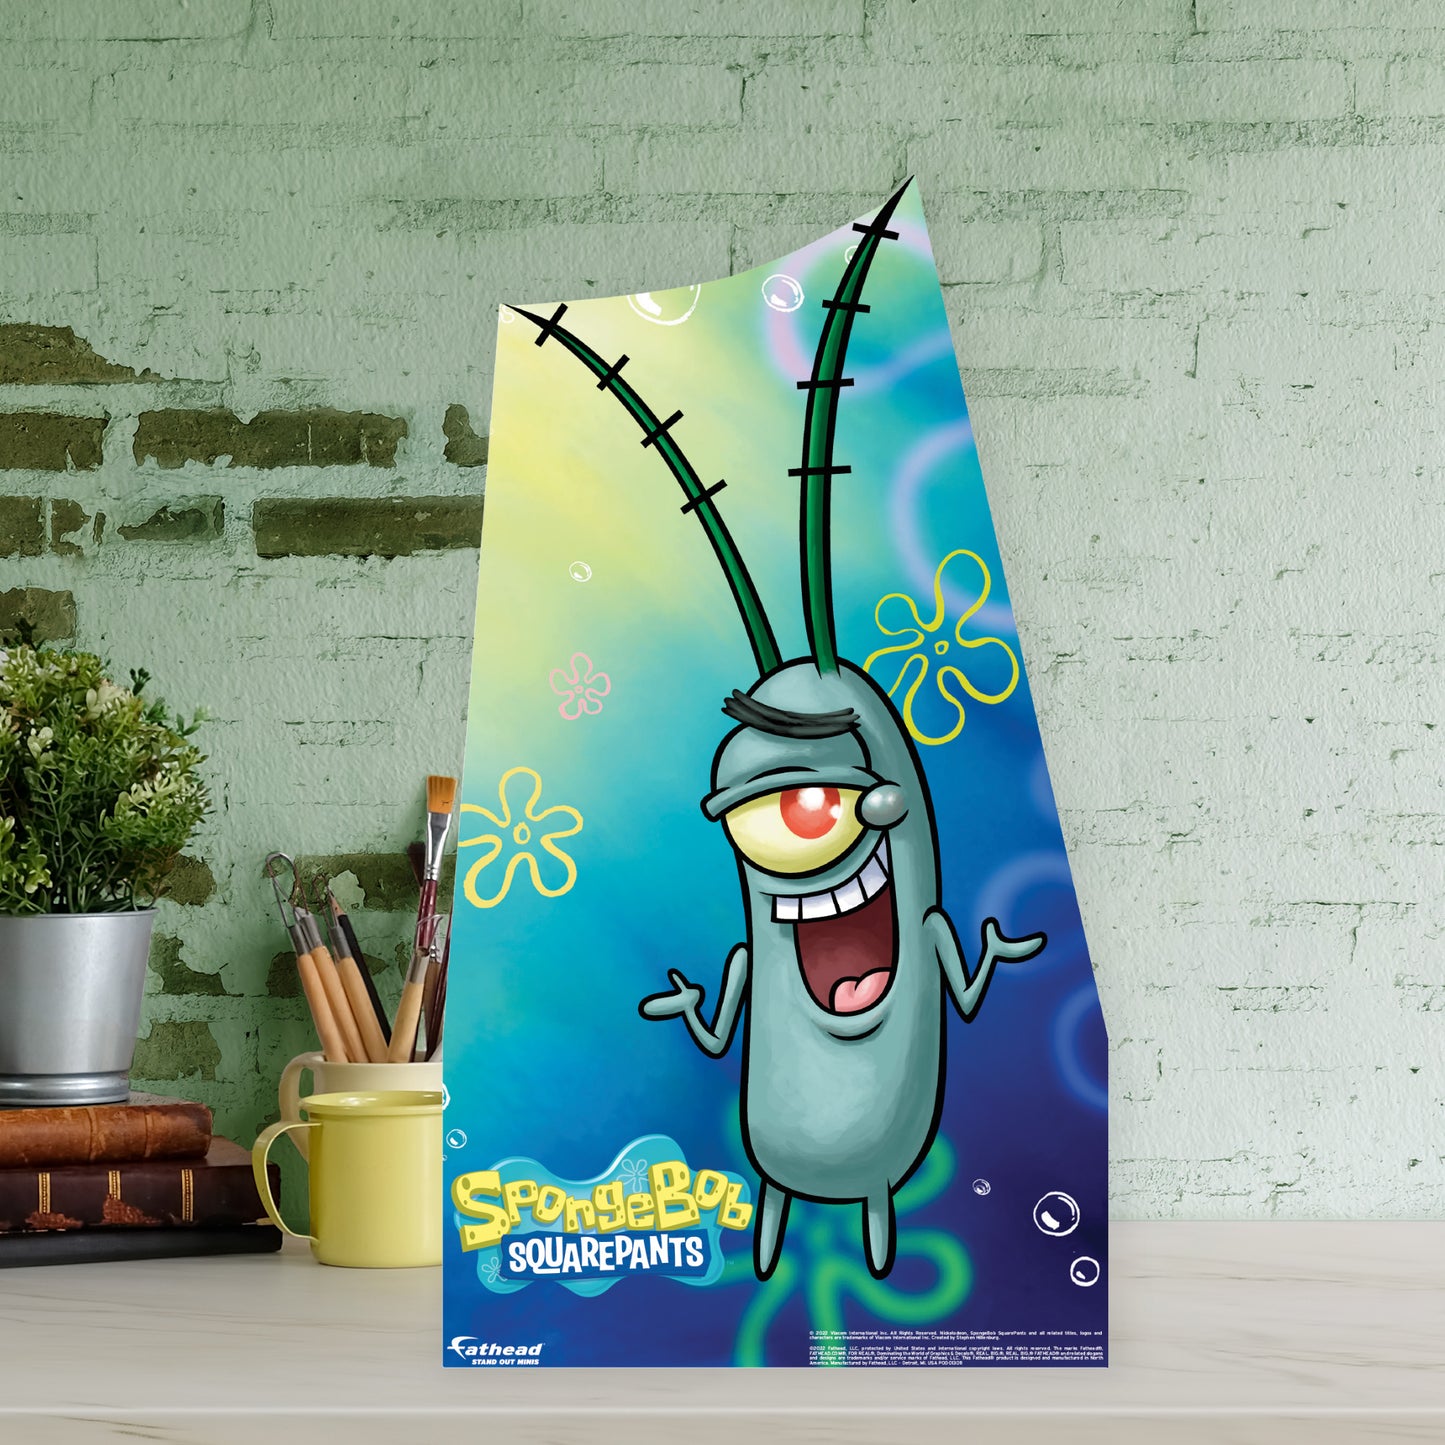 SpongeBob Squarepants: Plankton Mini   Cardstock Cutout  - Officially Licensed Nickelodeon    Stand Out